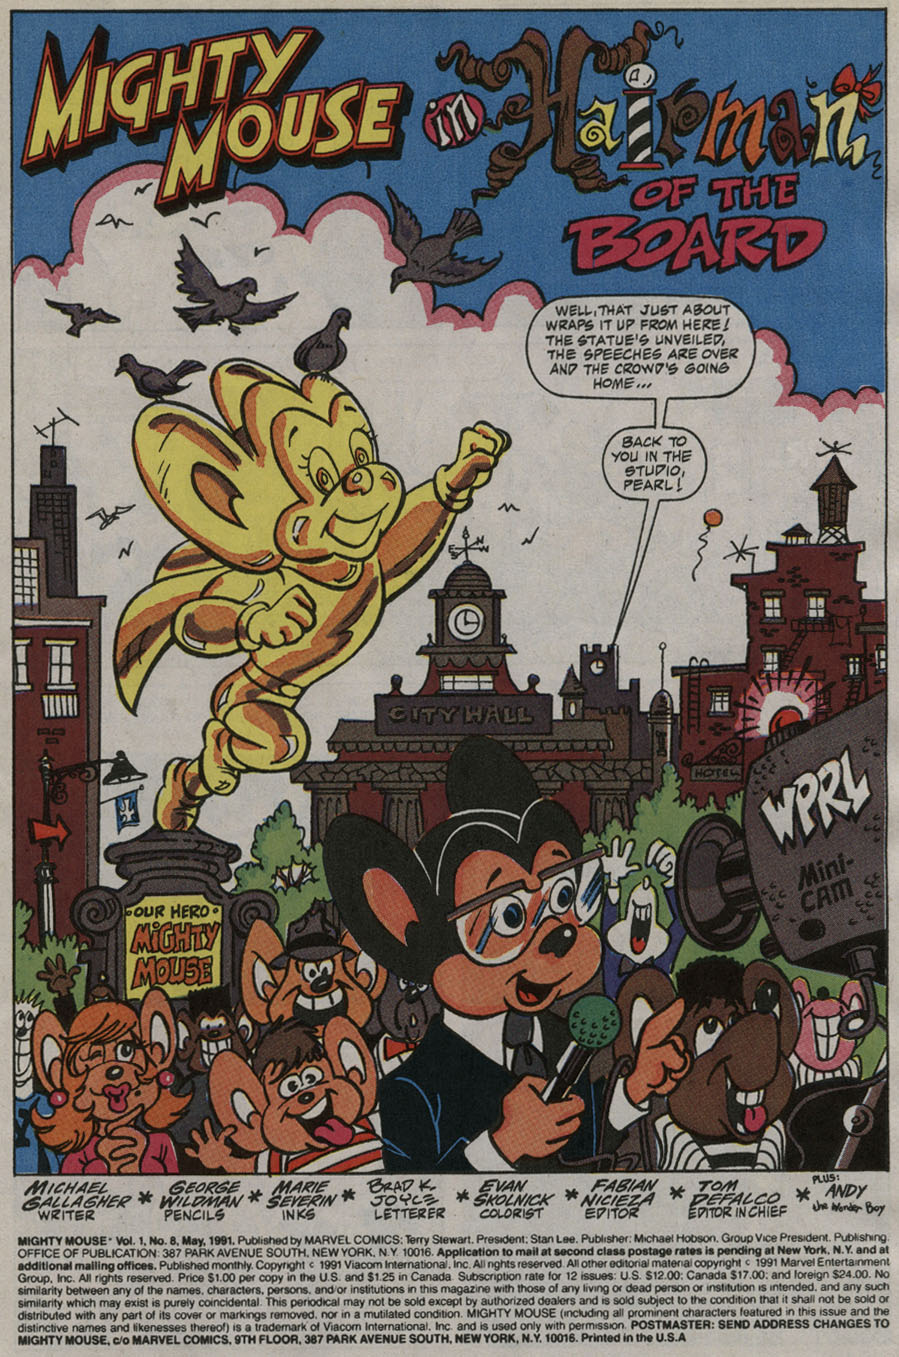 Mighty Mouse Issue 8 | Read Mighty Mouse Issue 8 comic online in high  quality. Read Full Comic online for free - Read comics online in high  quality .